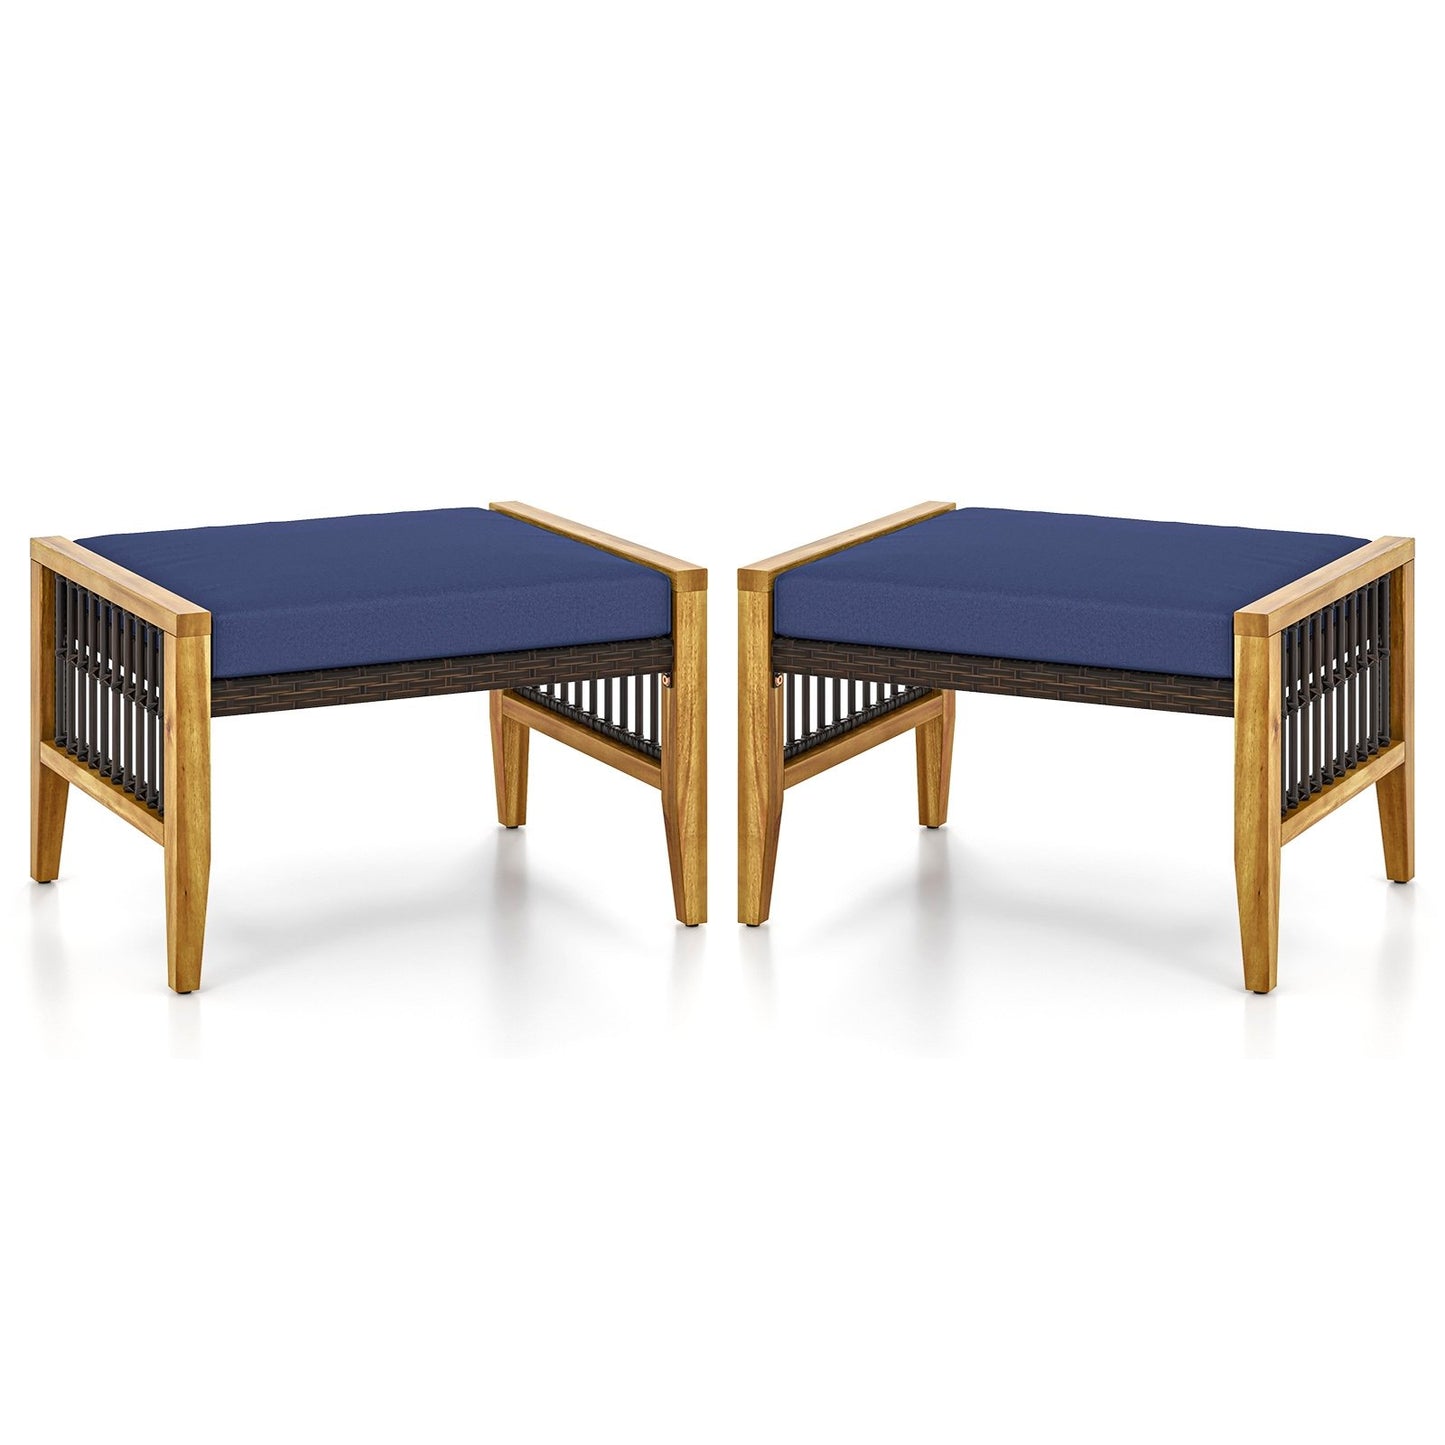 Patio Acacia Wood Ottomans with Cushions and Versatile Rattan Woven Footstools, Navy